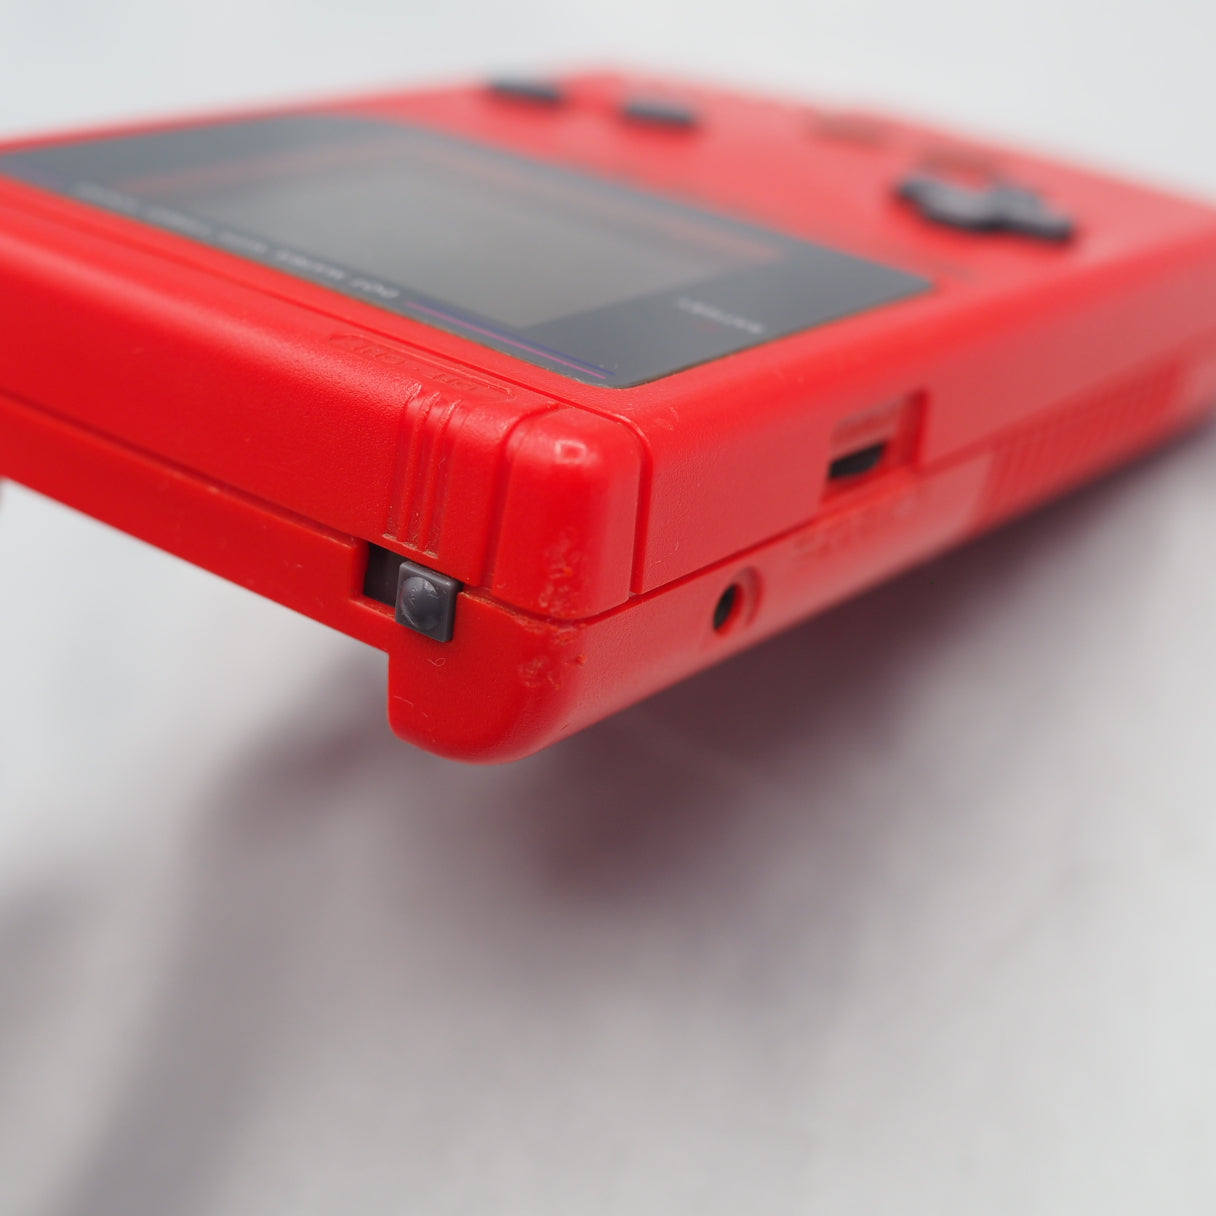 Nintendo GAME BOY Console DGB-001 [Red]